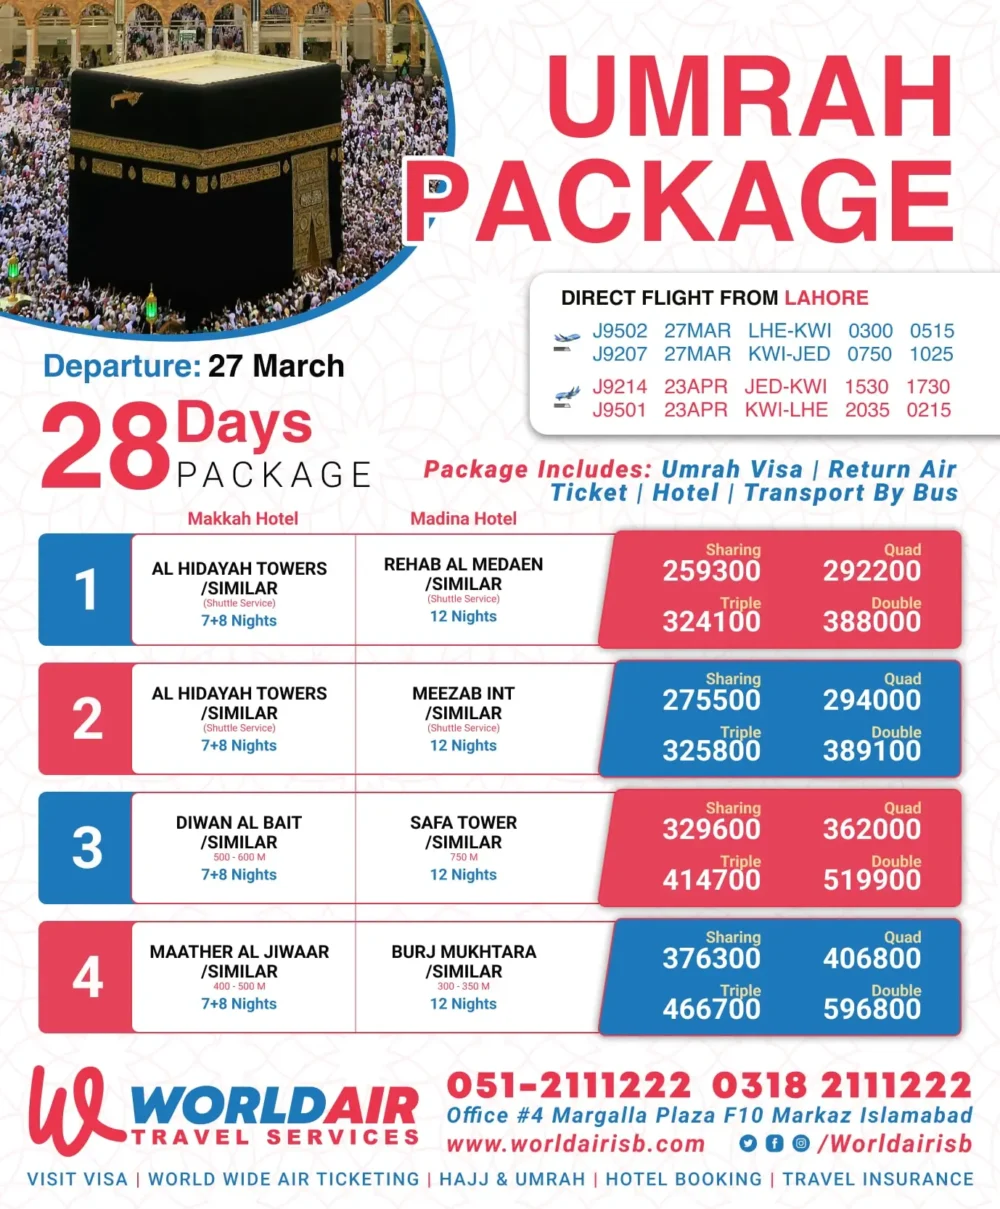 Umrah Package for 28 Days starting from 259300. Departure 27th March with 4 different Packages by world air travel services Islamabad with different hotels.